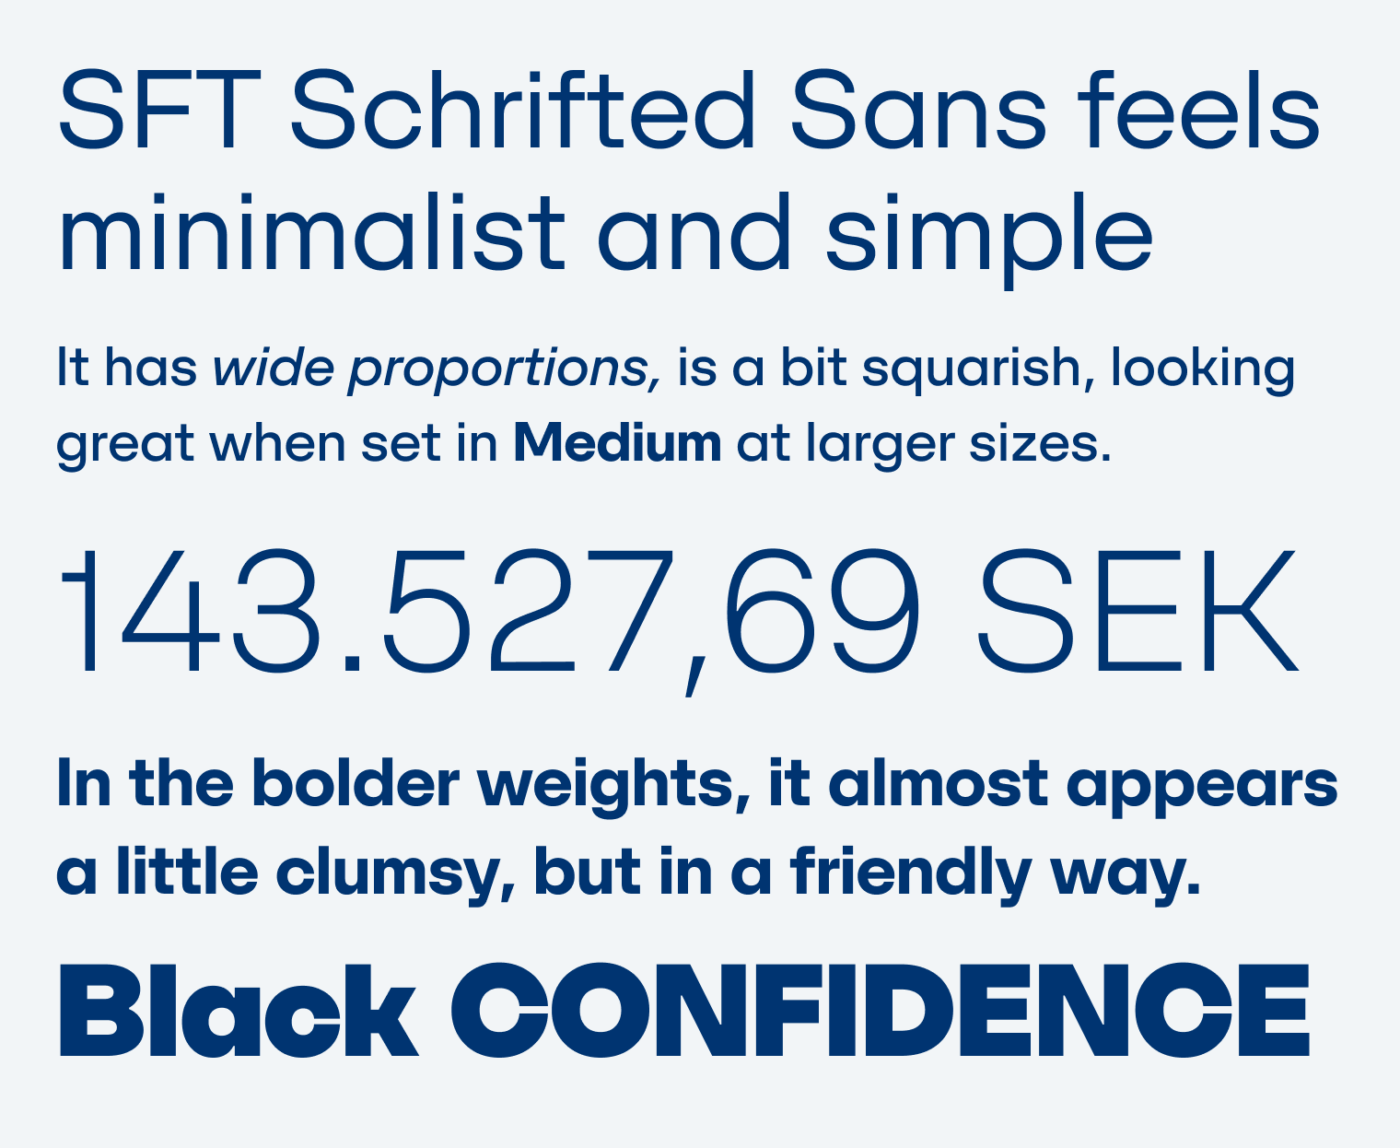 ST Schrifted Sans feels minimalist and simple
It has wide proportions, is a bit squarish, looking great when set in Medium at larger sizes.
143.527,69 SEK
In the bolder weights, it almost appears a little clumsy, but in a friendly way.
Black CONFIDENCE